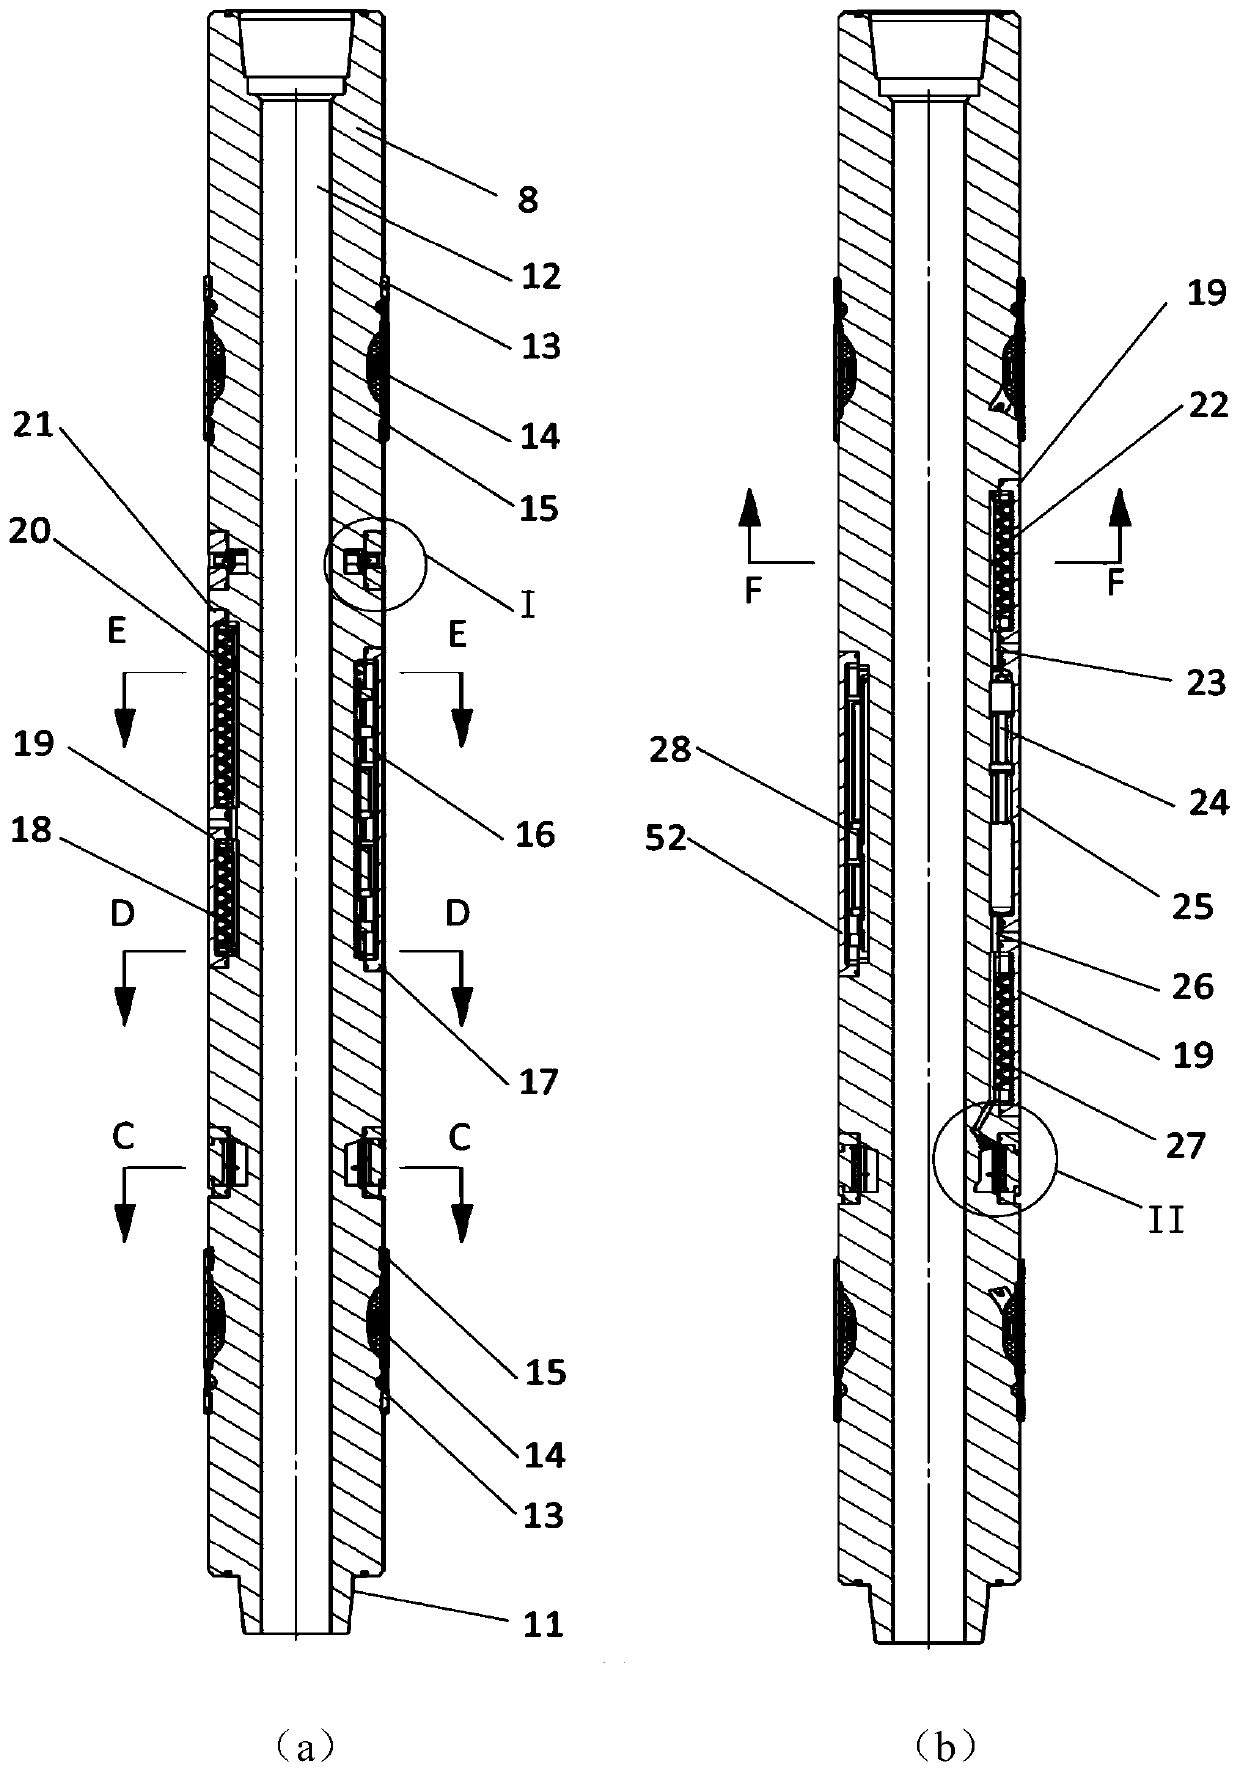 Imaging logging short section structure based on rotary guiding and rotary guiding well drilling device